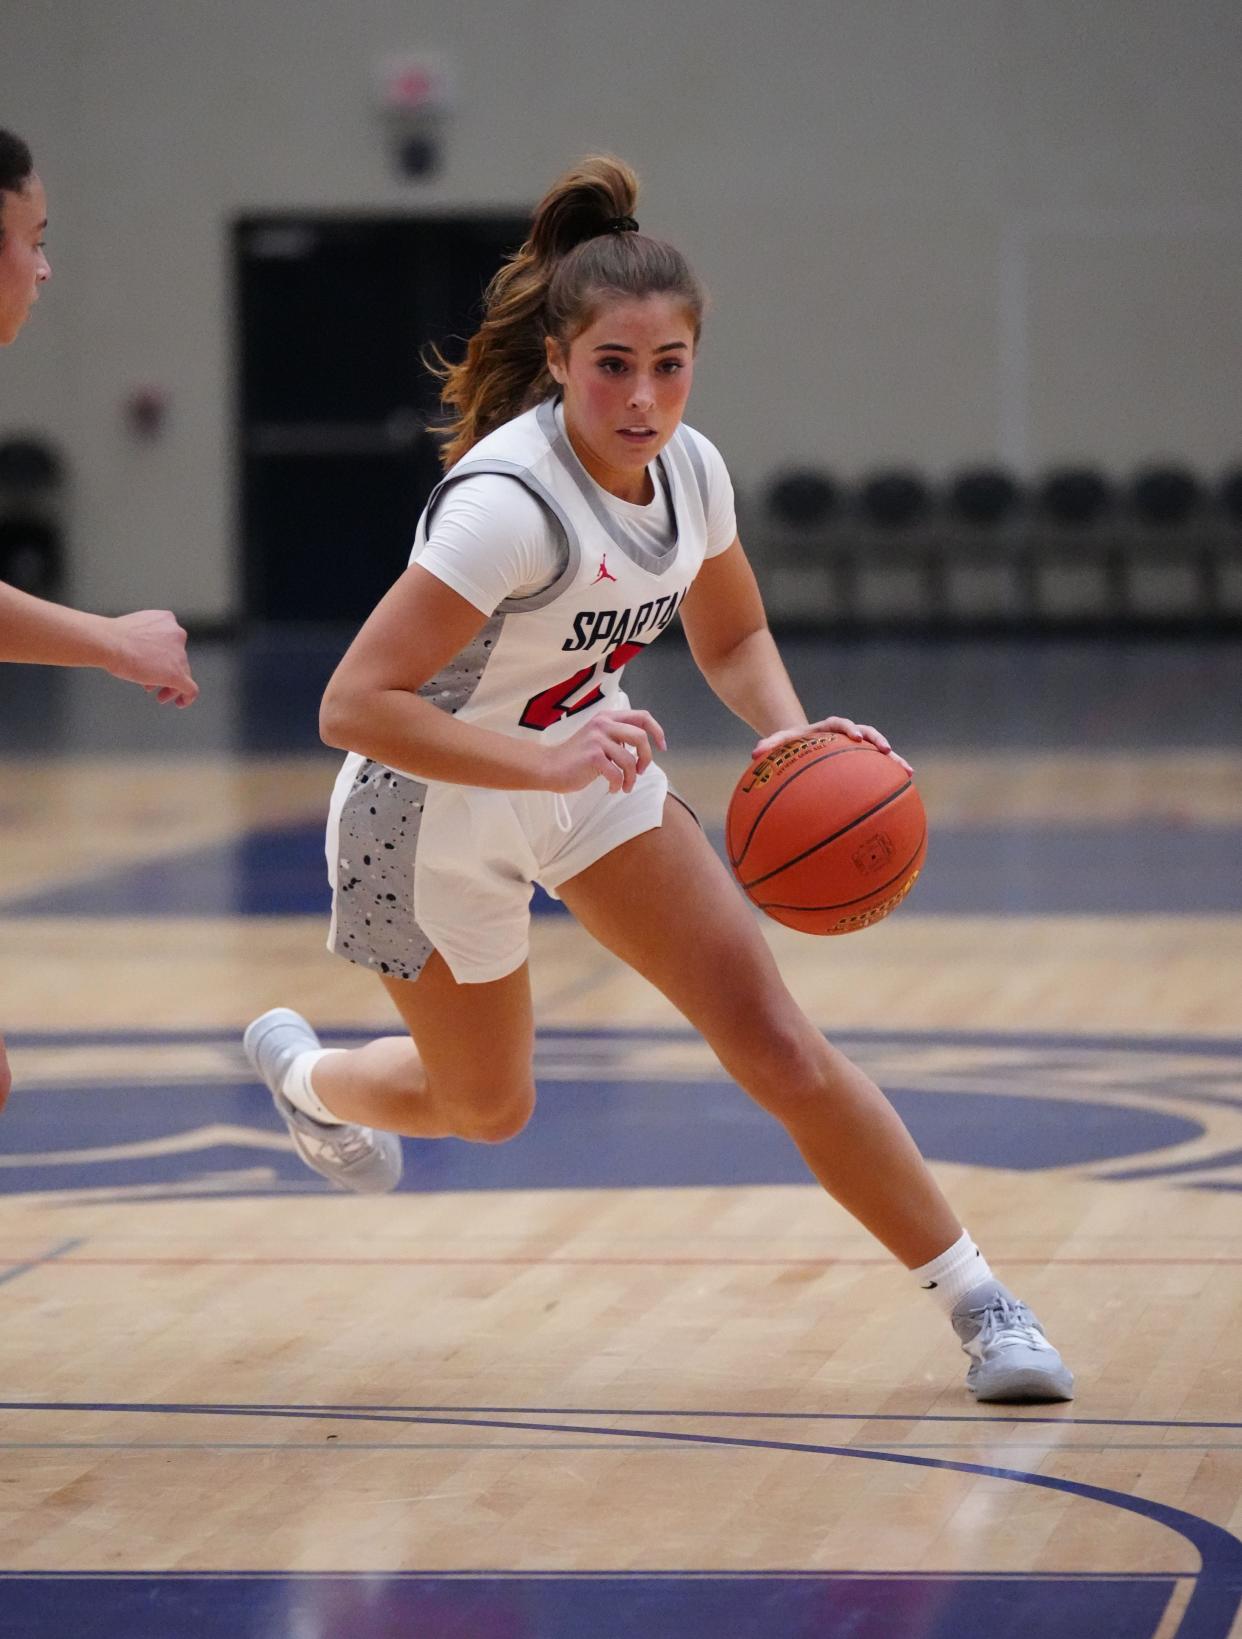 Shae Kelley helped Brookfield East reach the WIAA Division 1 state championship game last season and averaged 14.1 points, 6.0 rebounds, 5.8 steals and 4.2 assists.